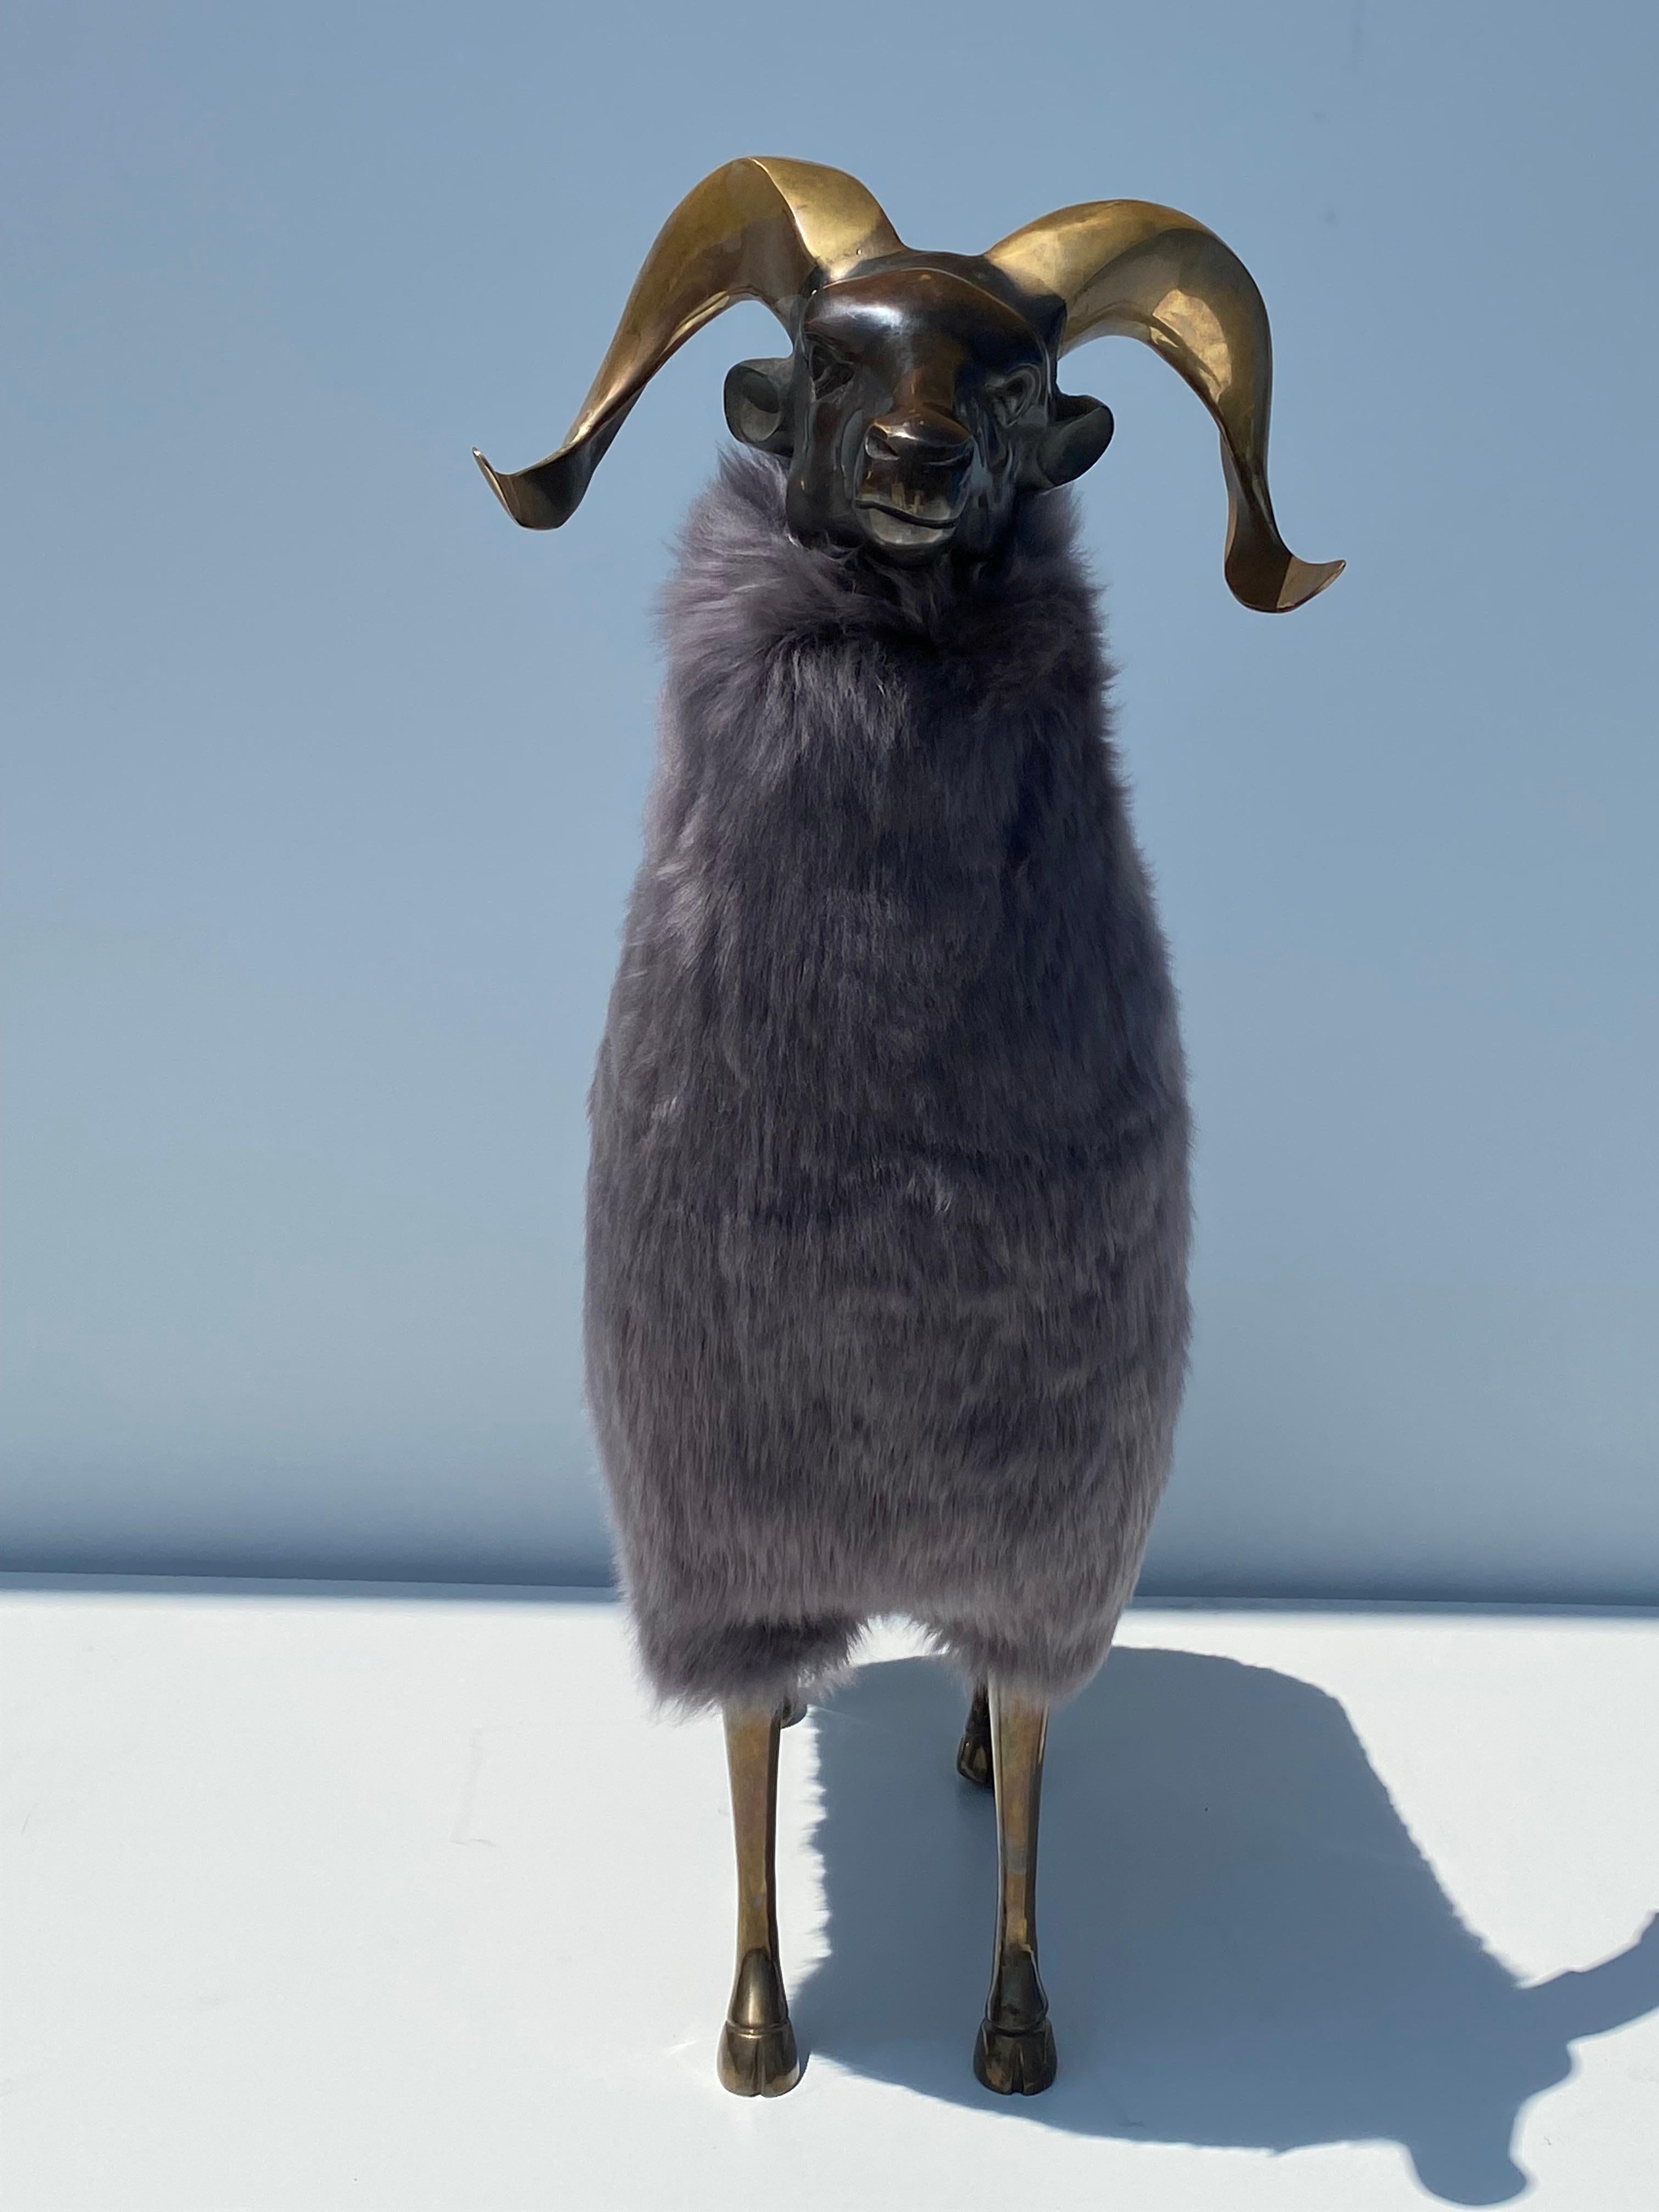 Brass sheep / ram sculpture in the style of Lalanne. Newly covered in silver gray sheep fur.